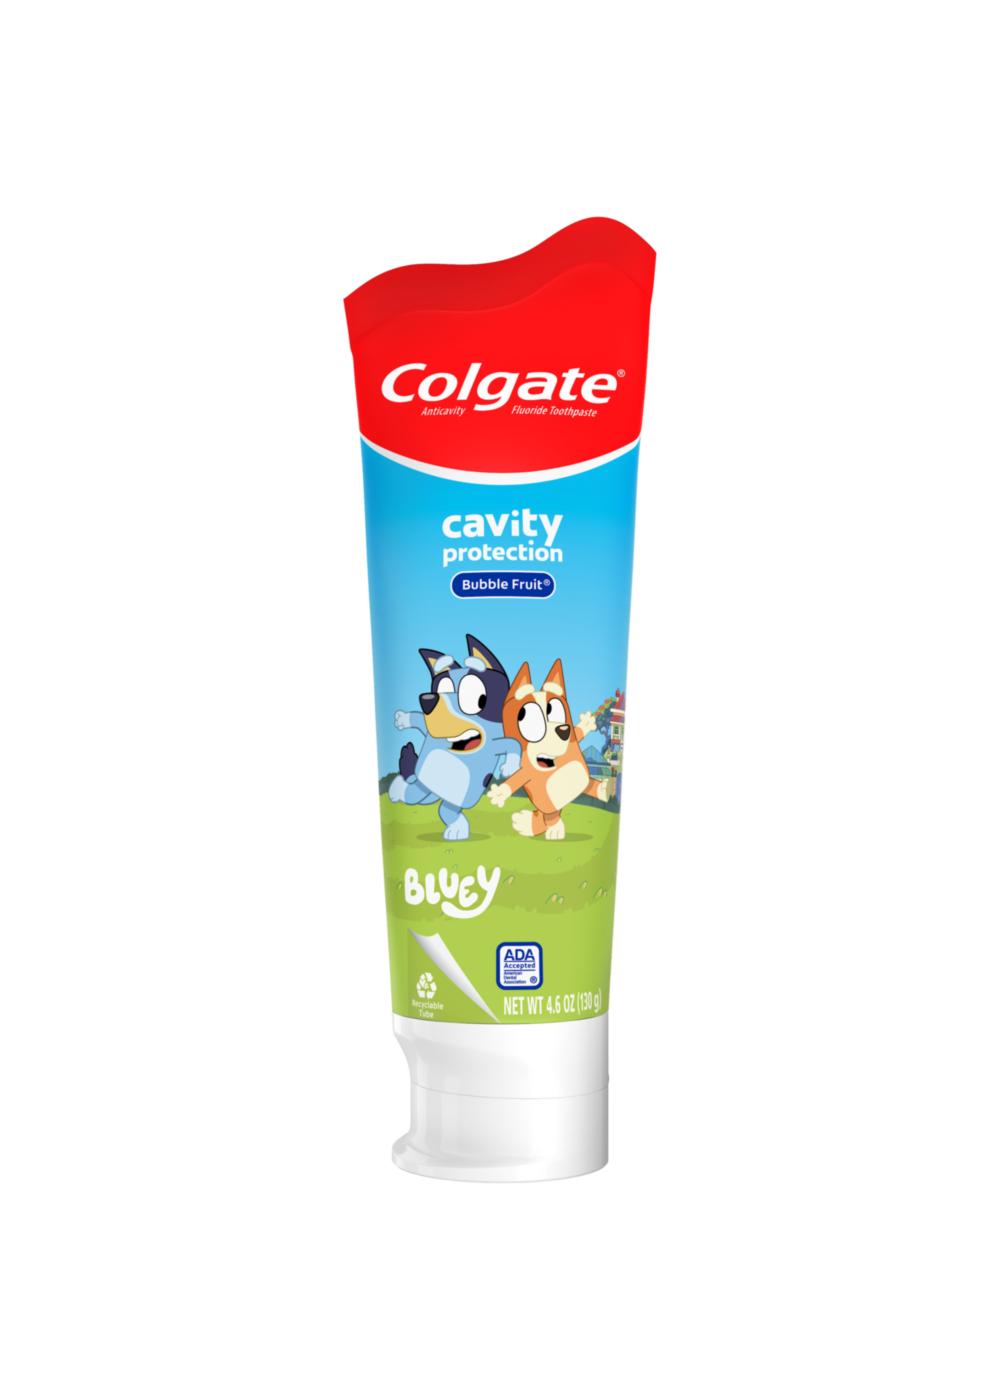 COLGATE Bluey Cavity Protection Toothpaste - Bubble Fruit; image 1 of 2